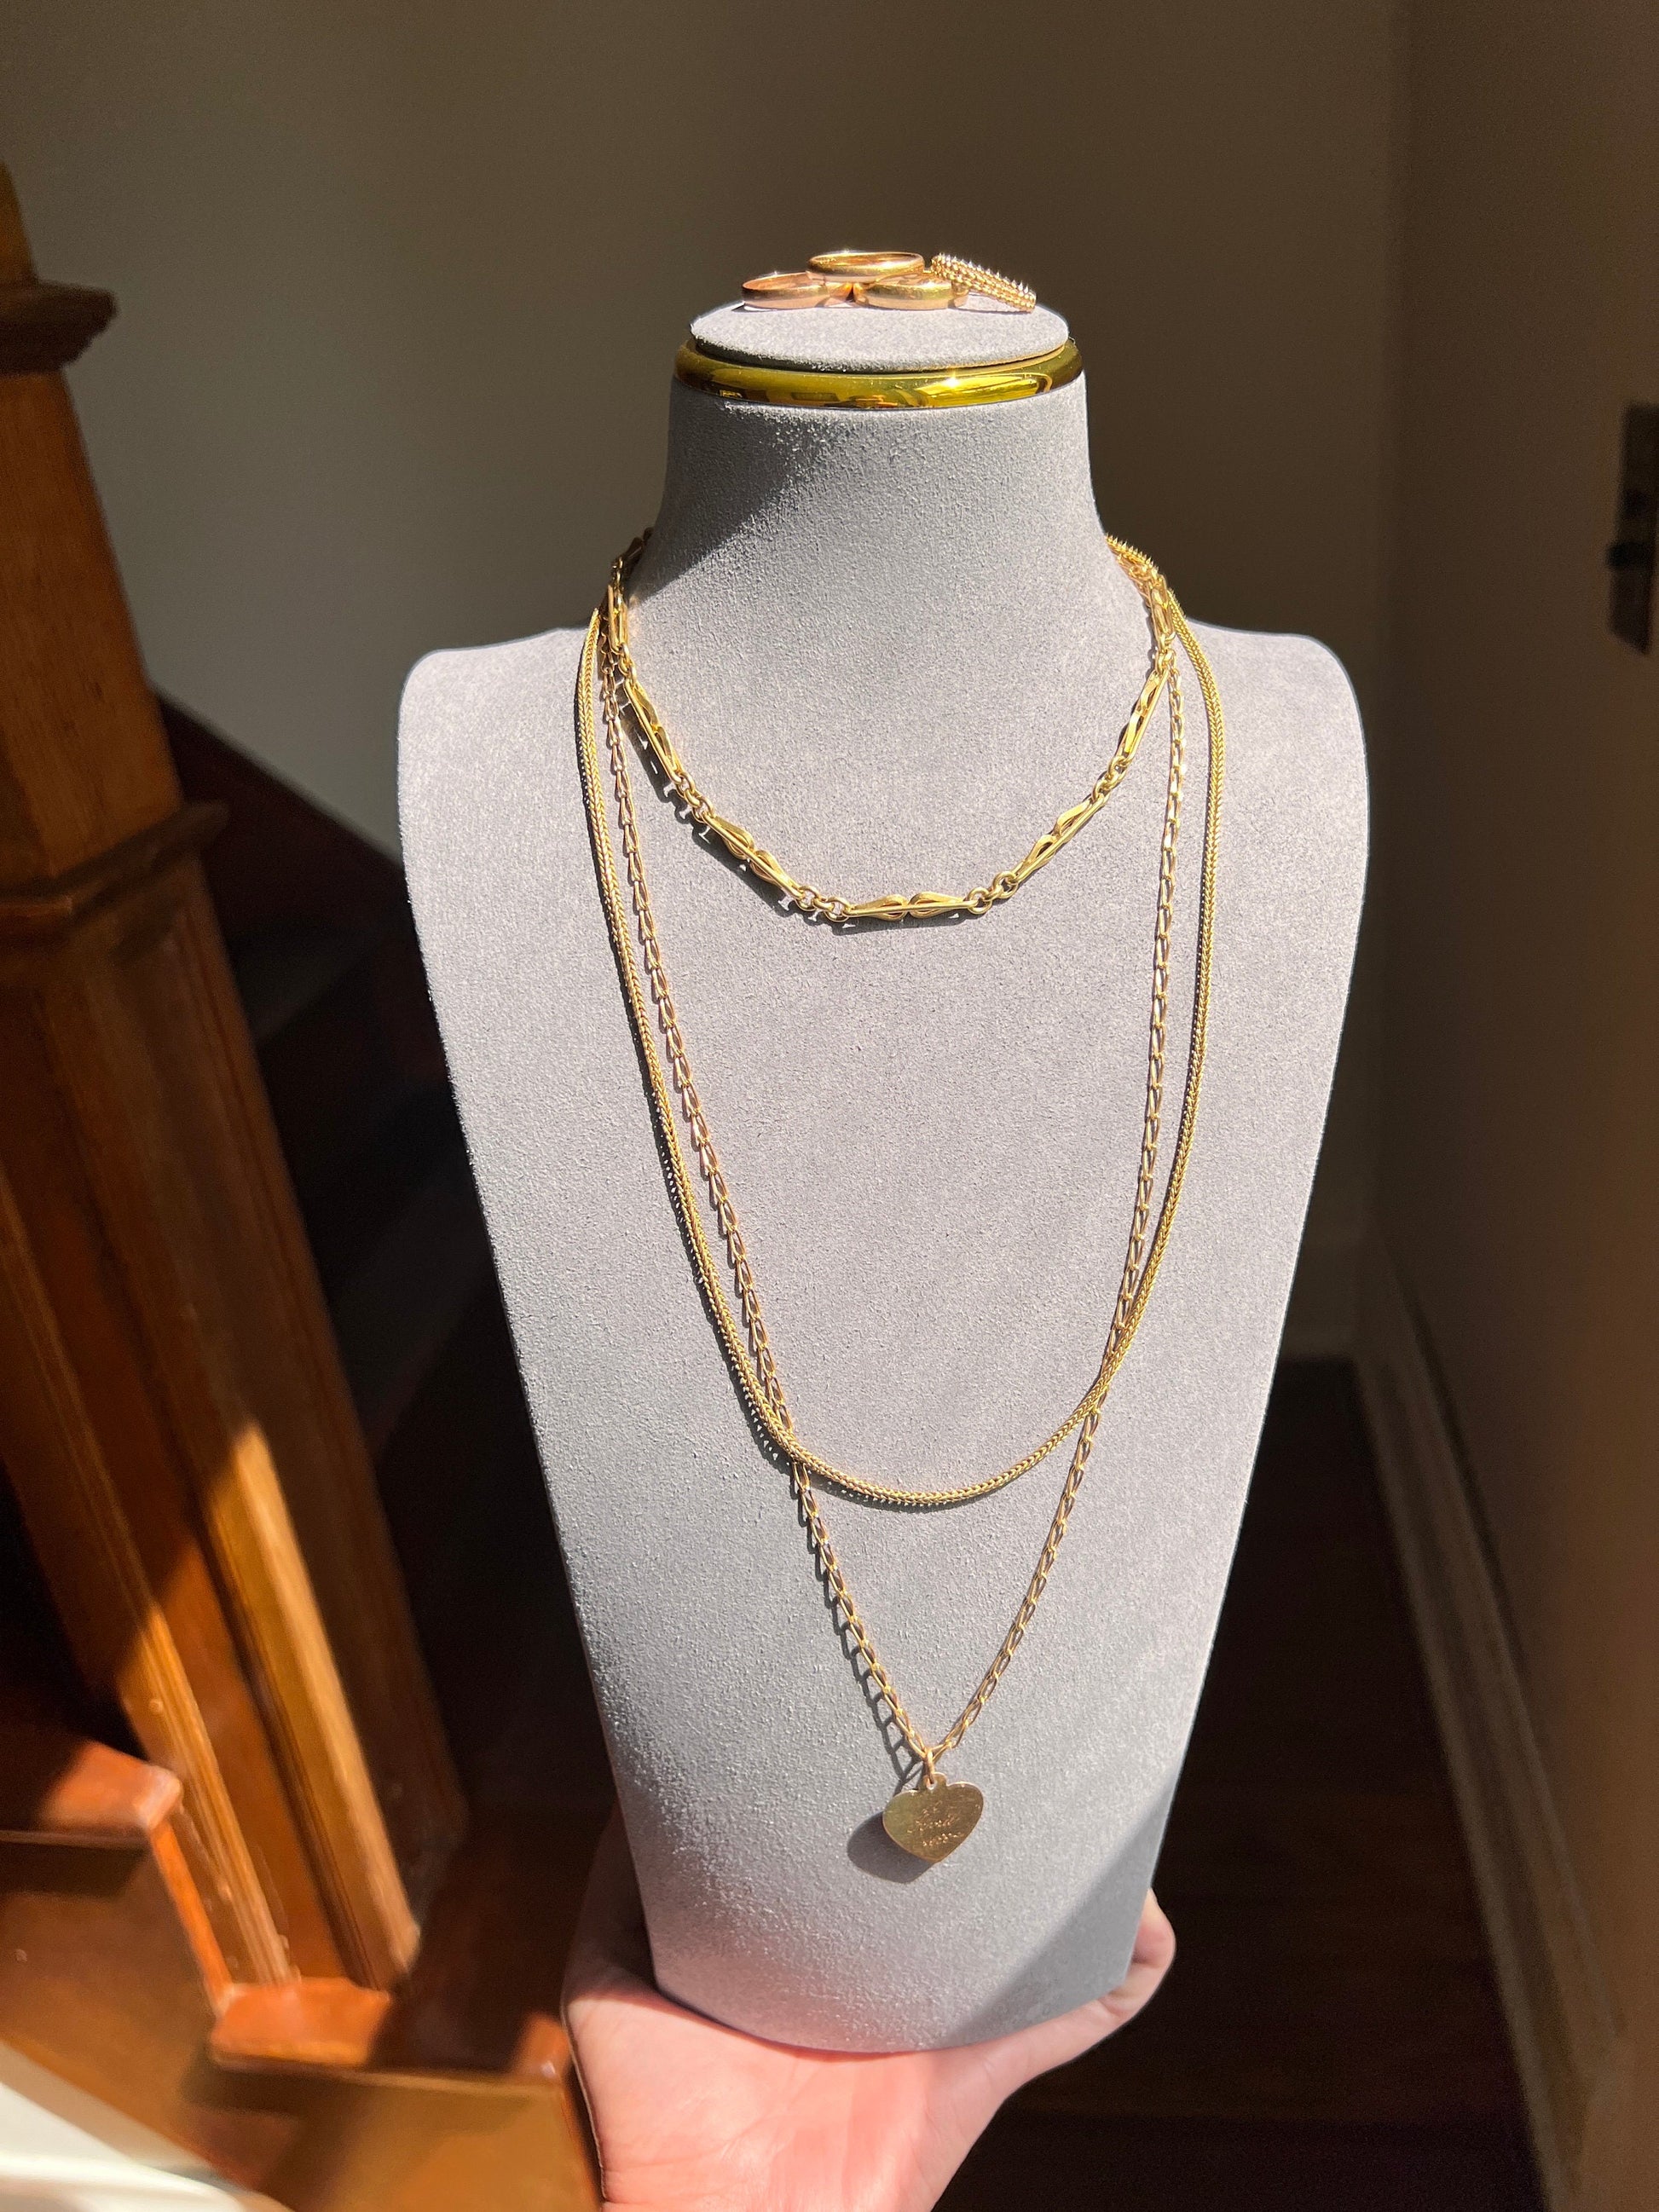 LONG French Sturdy Shimmering Vintage CURB Link Chain 6.5g 18k GOLD Solid Necklace 23.5" Neckmess Neckstack Retro Layering Romantic Gift Vtg